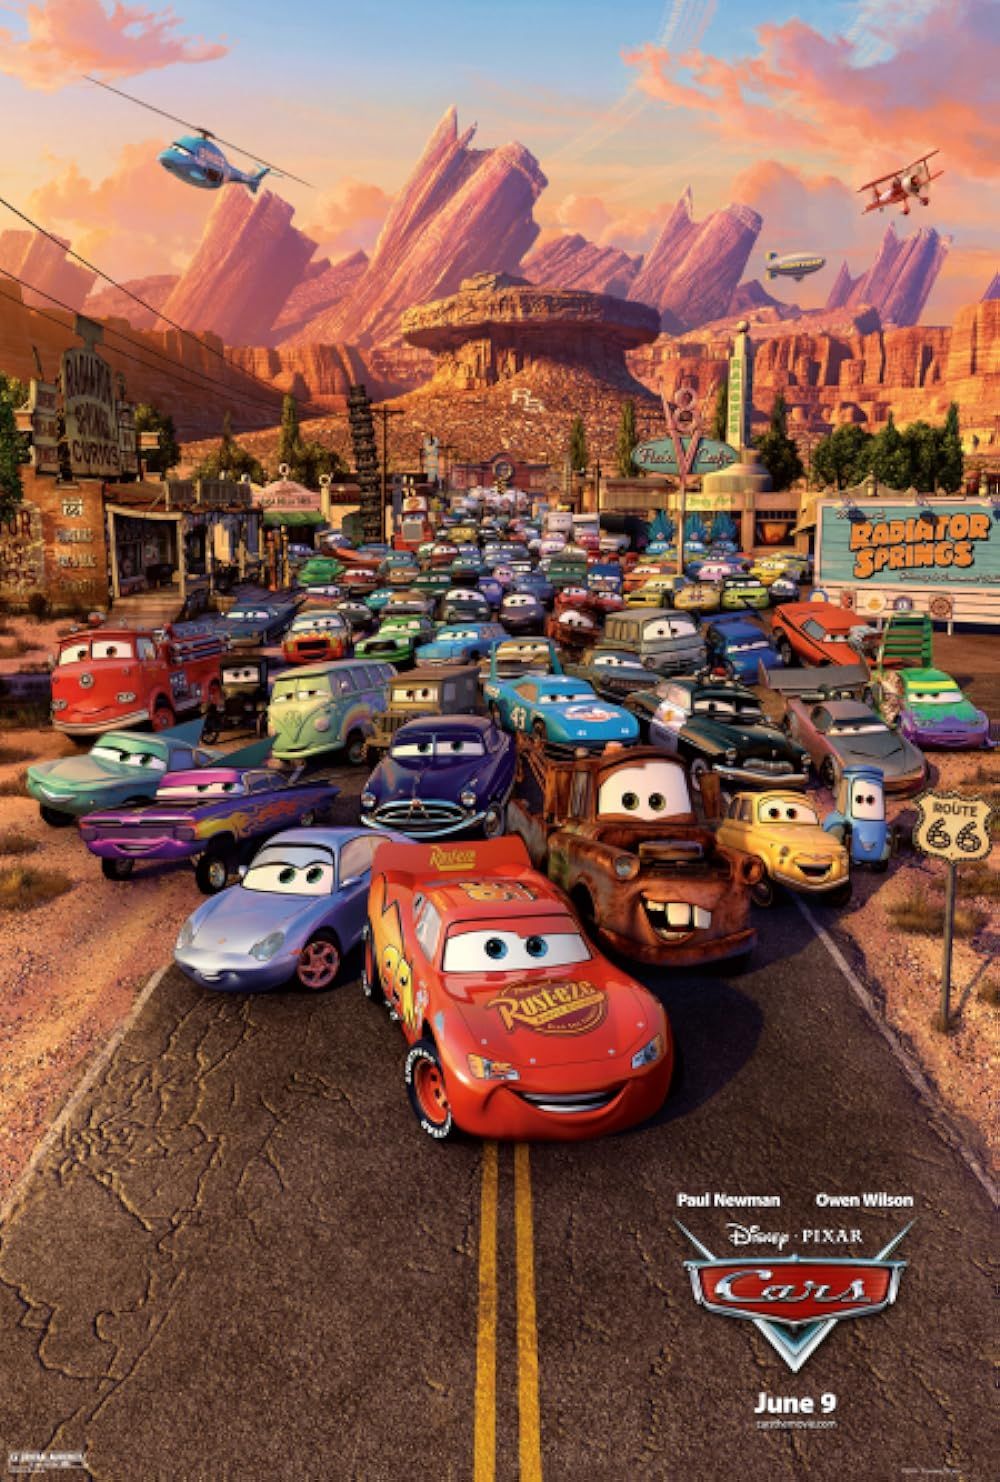 Poster for Pixar's Cars